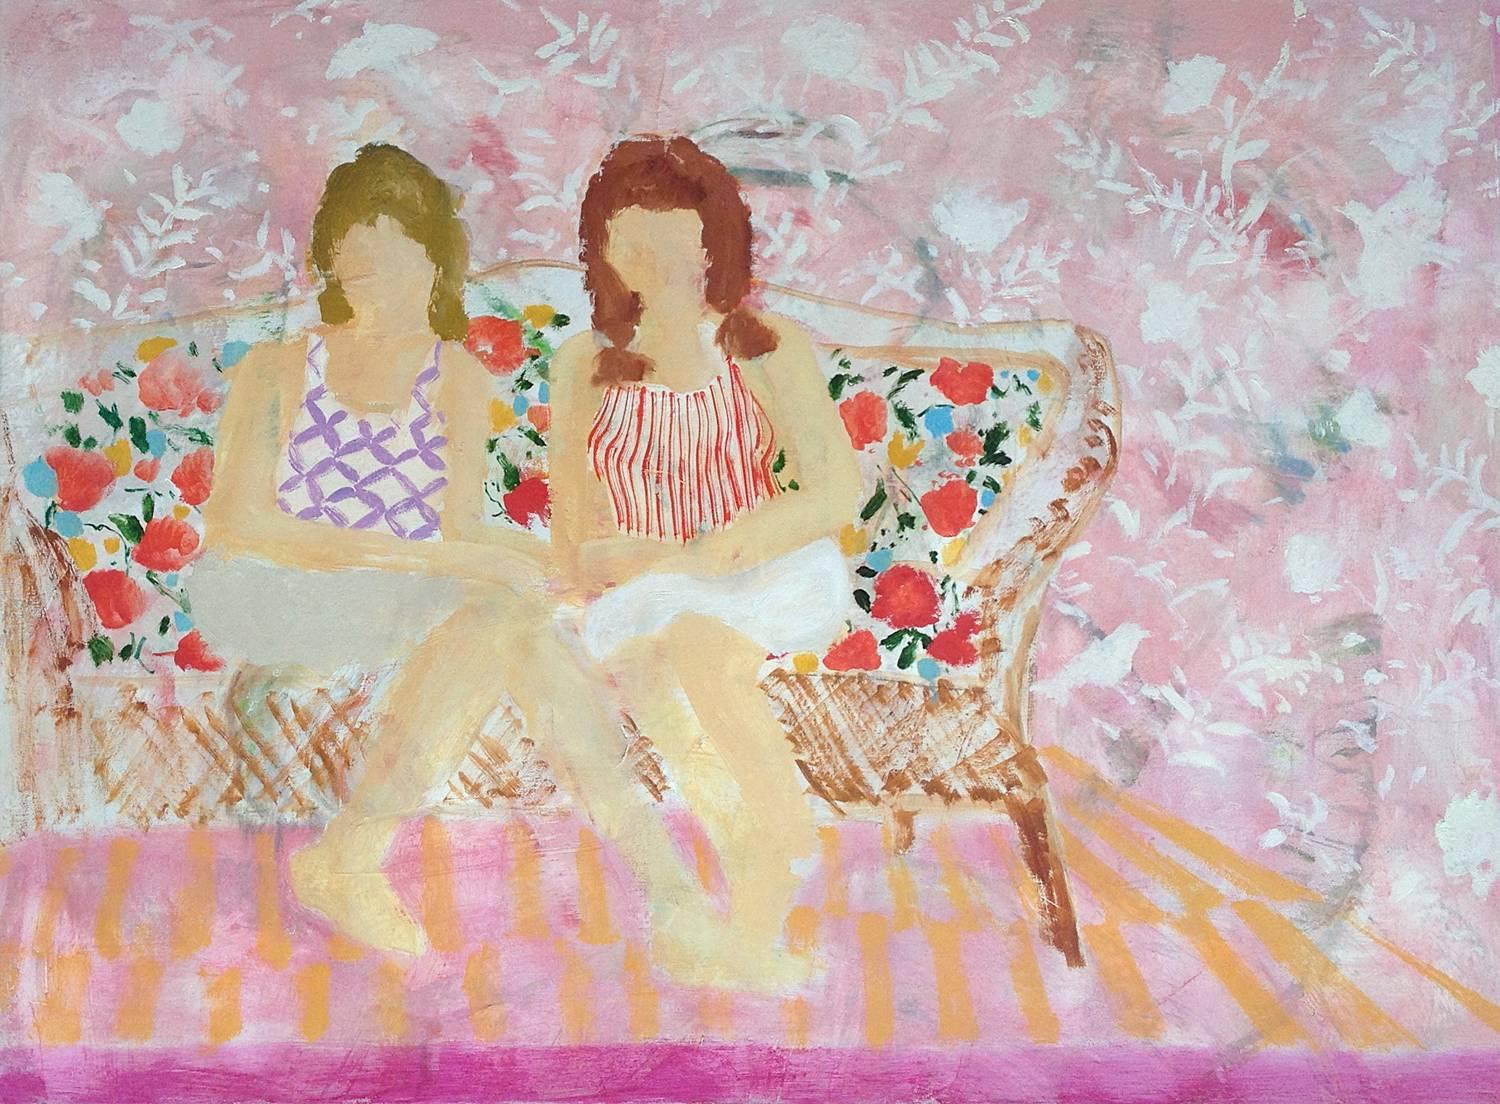 Melanie Parke Interior Painting - Sisters, Two Women in Patterned Shirts on Floral Print Couch, Pink Background